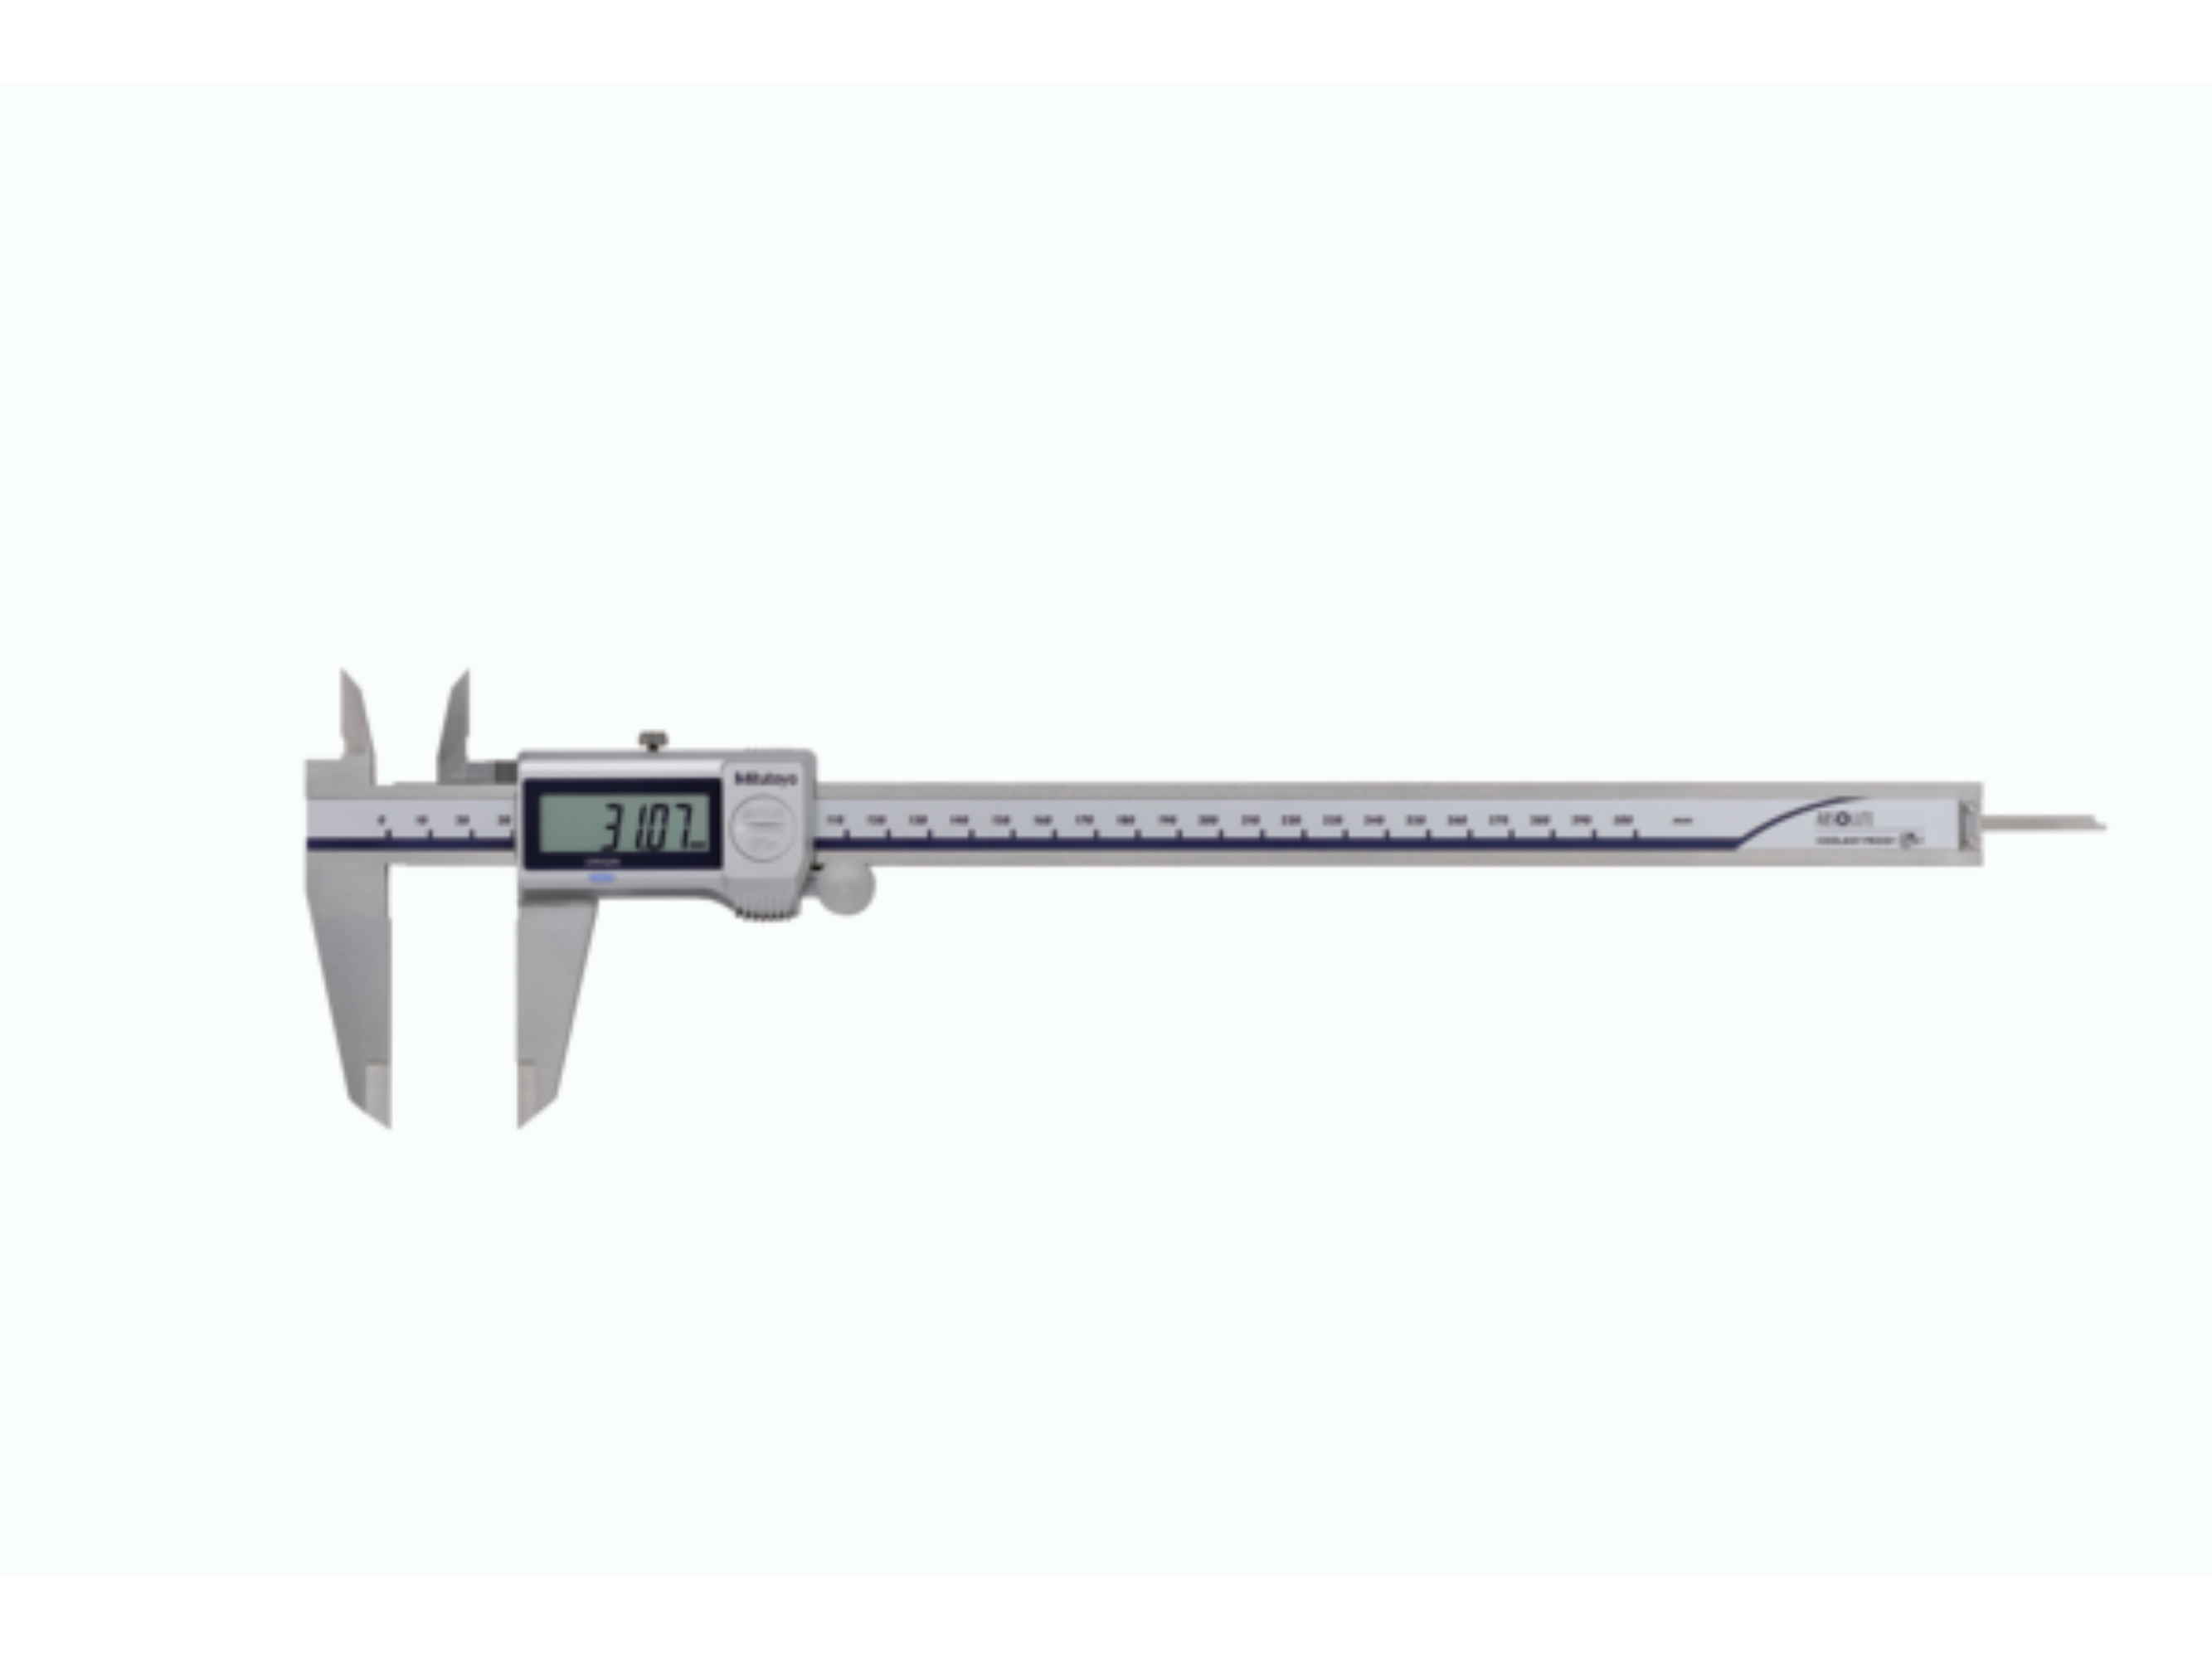 ABSOLUTE Coolant Proof Caliper 0-300mm IP67 (Square Depth Rod & Thumb Roller) 500-714-20